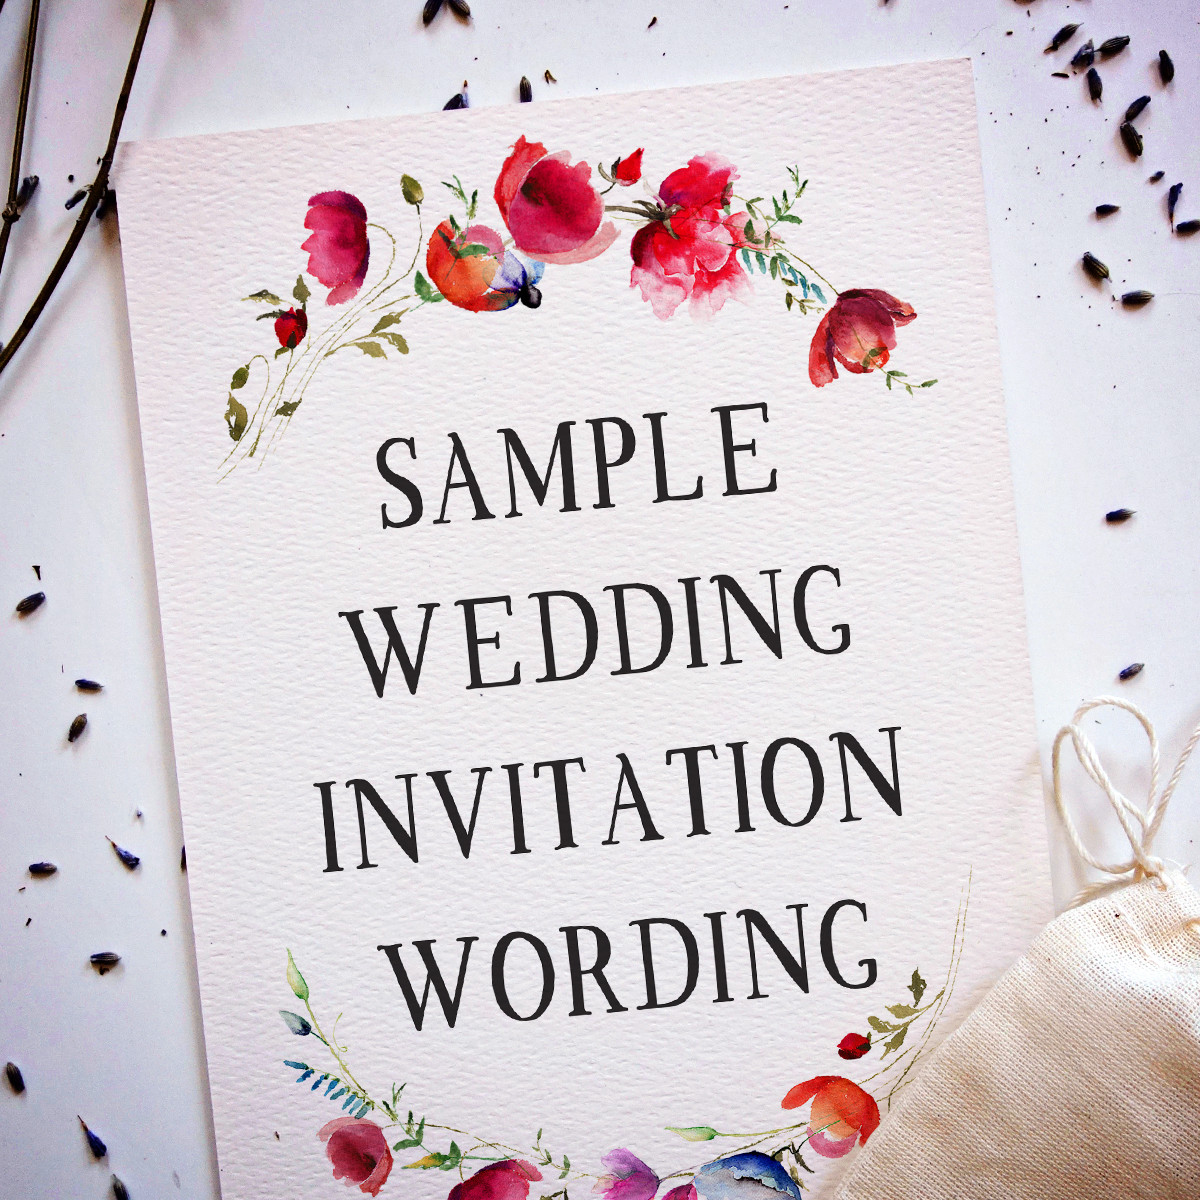 Marriage Invitation Quotes
 15 Wedding Invitation Wording Samples From Traditional to Fun